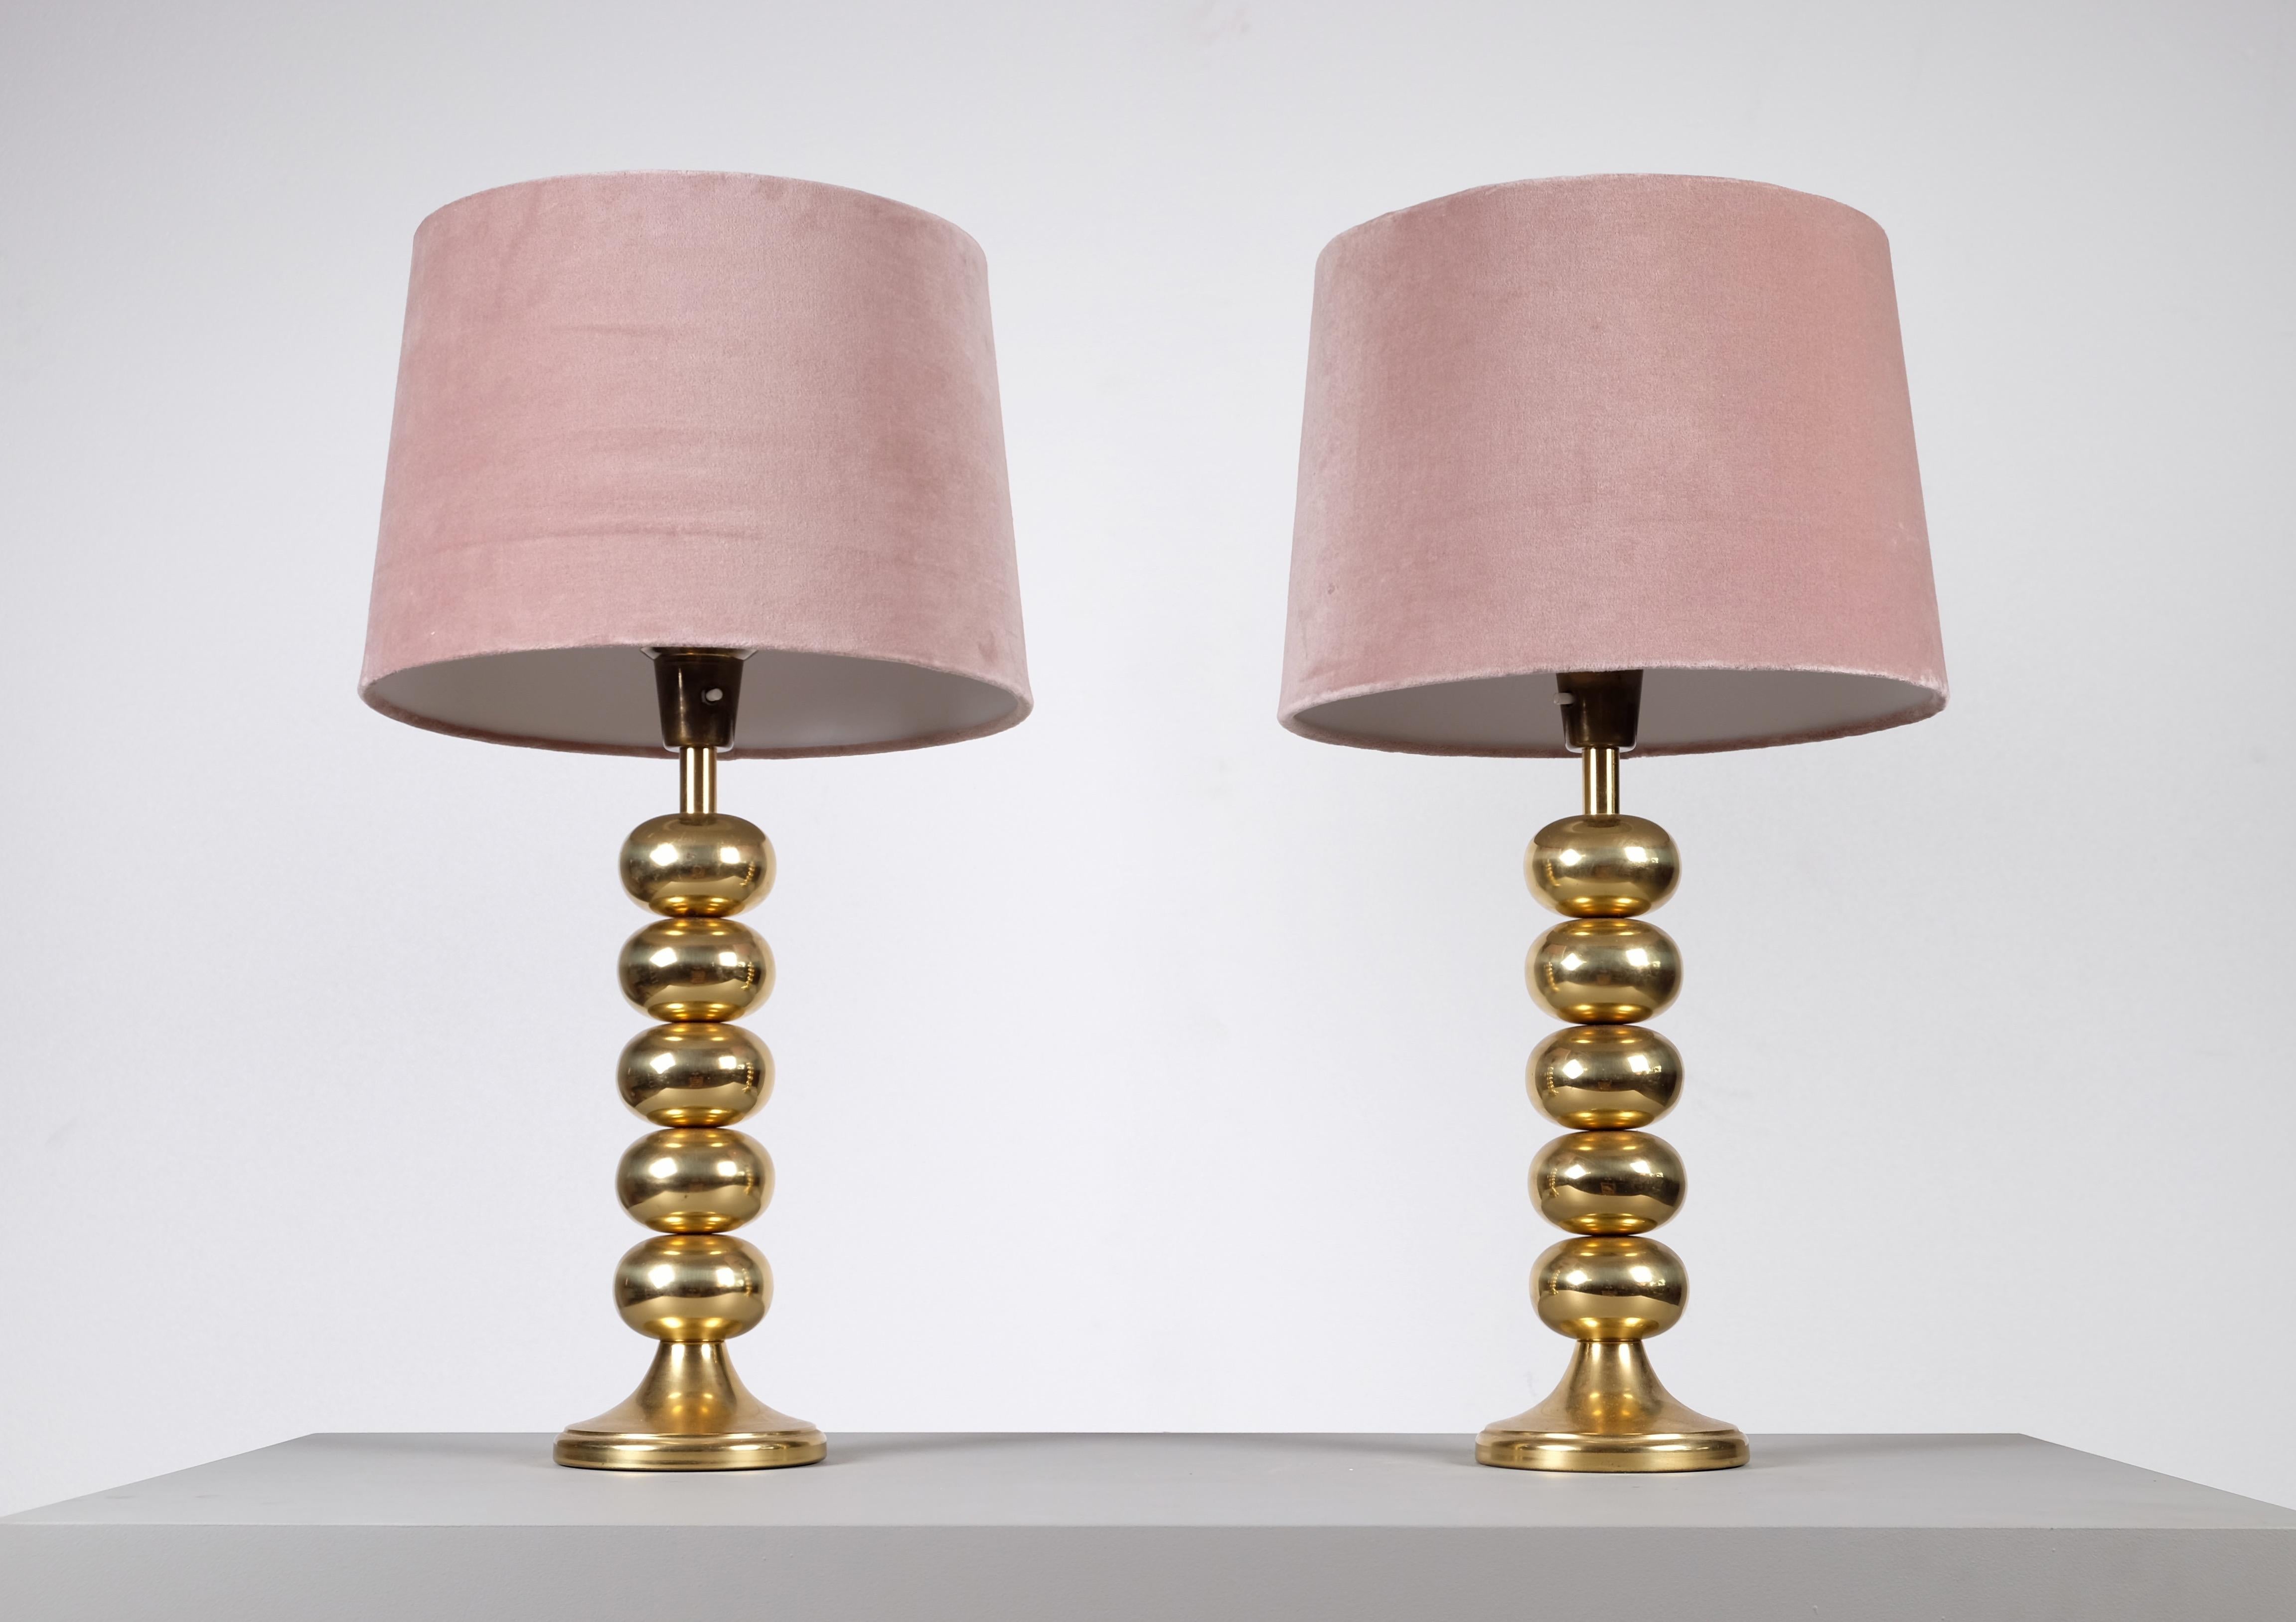 Produced by Aneta, Växjö, Sweden, 1970s. Pink velvet shades.
Global front door shipping, delivery within 7 days.